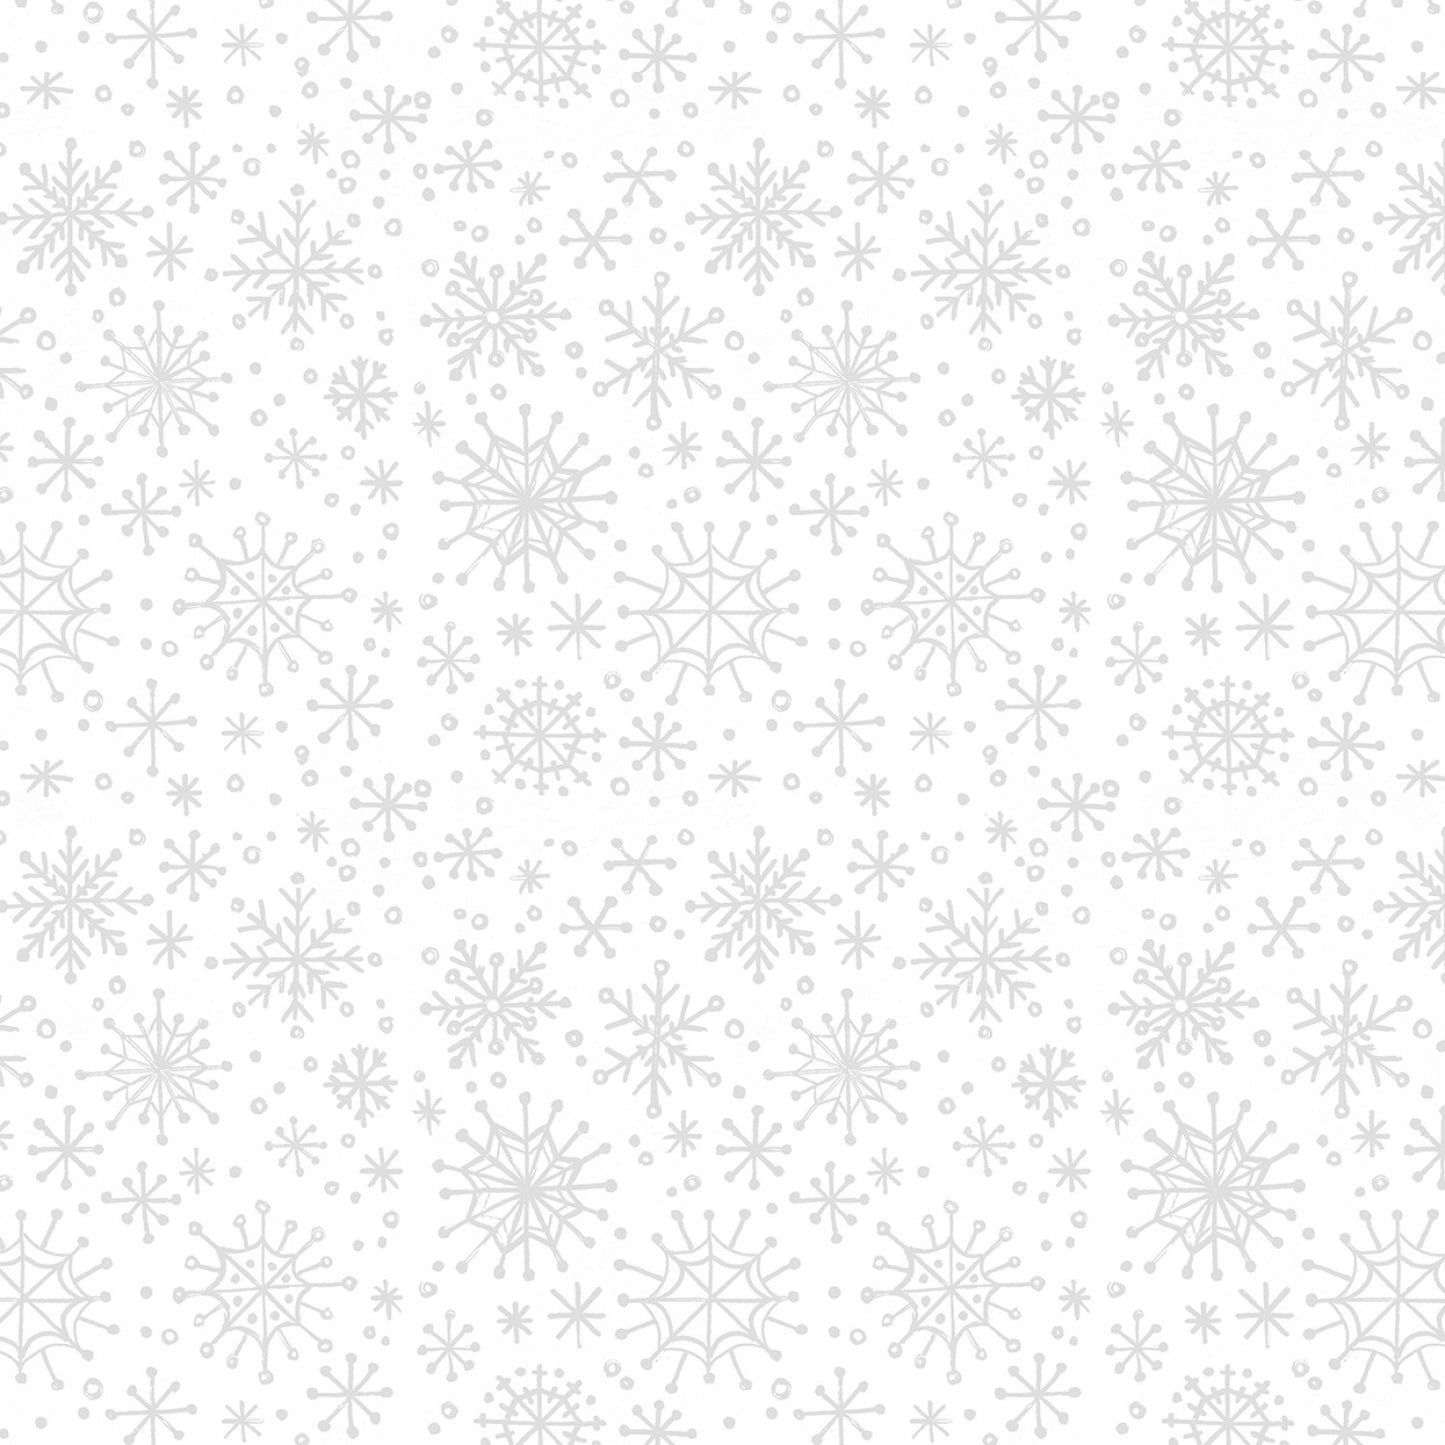 PREORDER ITEM: Baking Up Joy by Danielle Leone Snowflakes White    27711-191 Cotton Woven Fabric